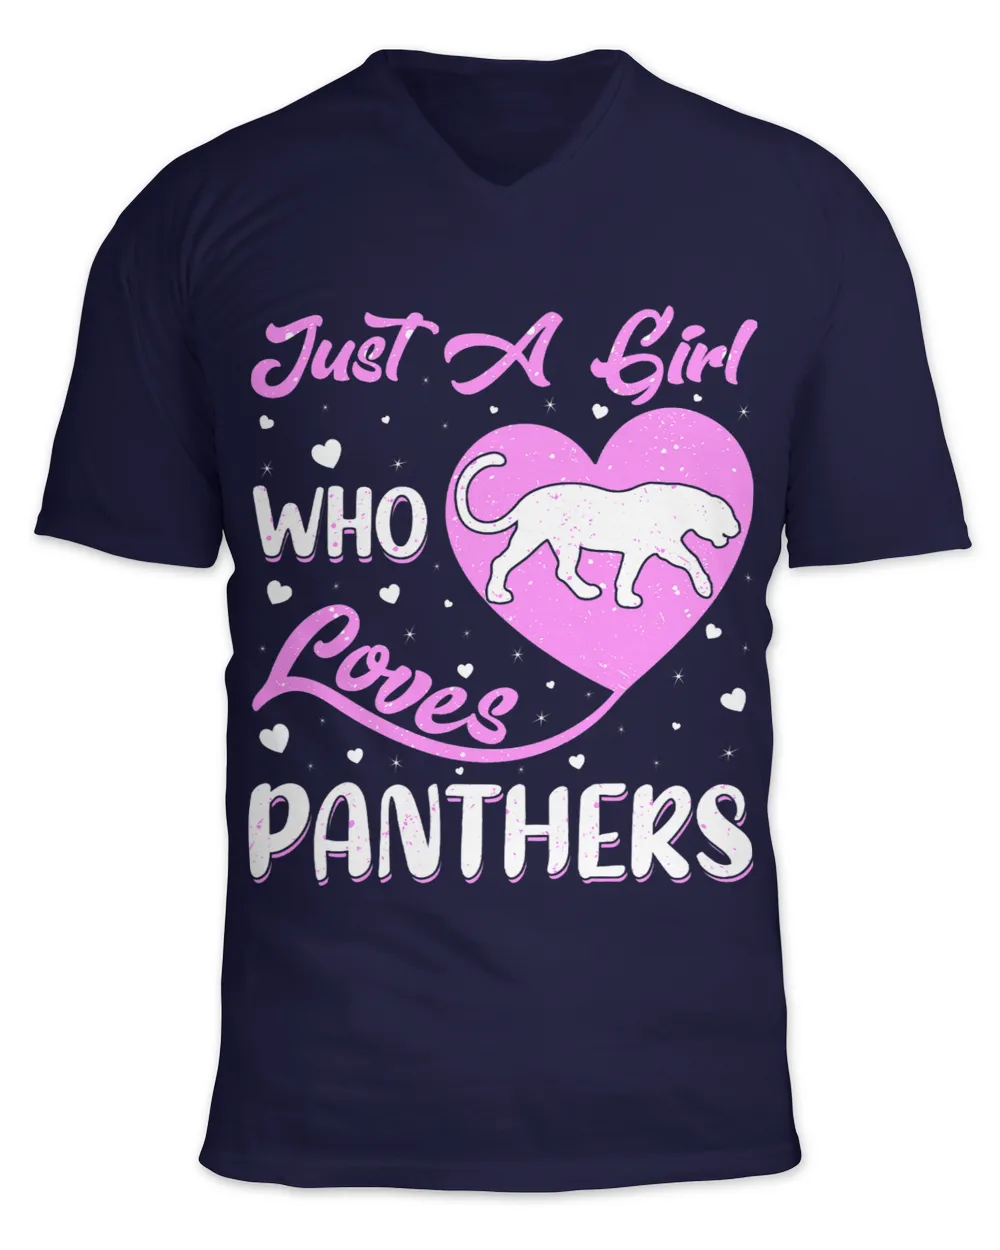 Panther Gift Heart Shape Panther Just A Girl Who Loves Panthers